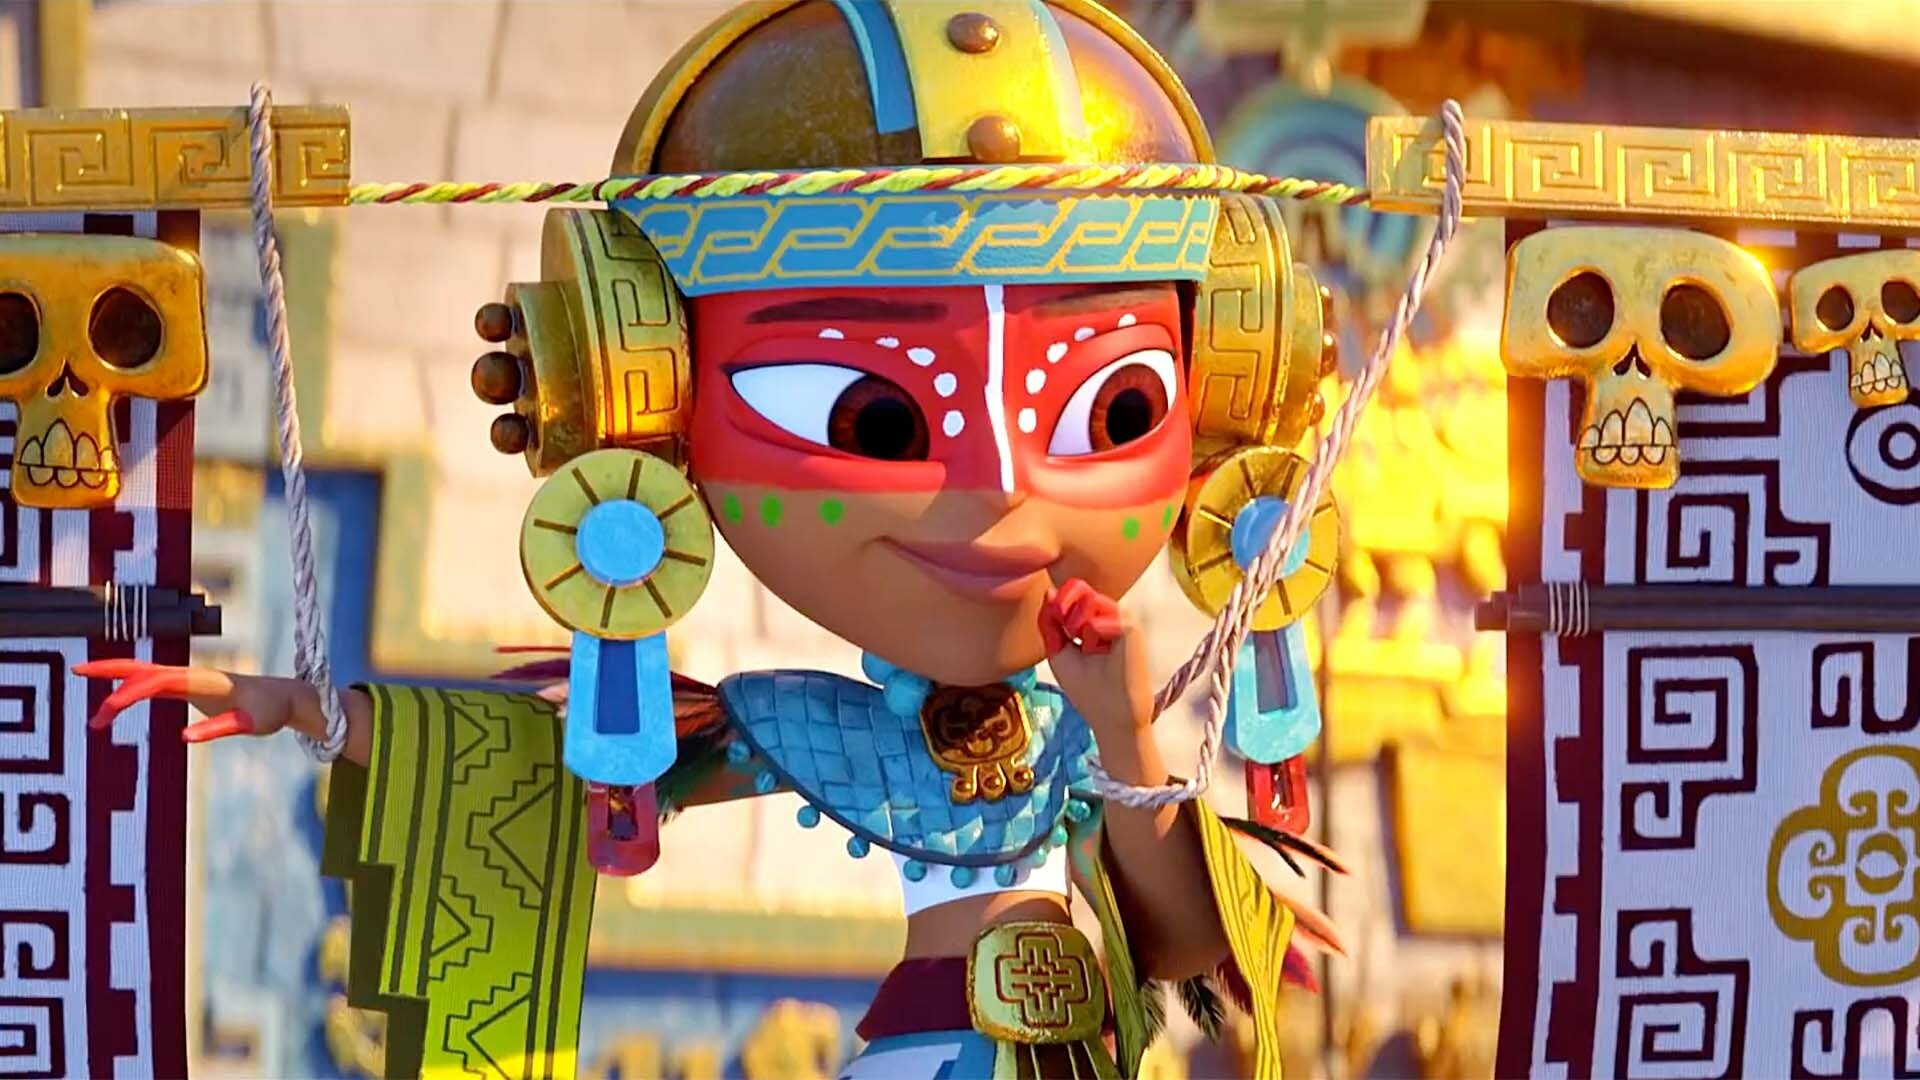 Maya and the Three: An animated television miniseries about a Mesoamerican warrior. 1920x1080 Full HD Wallpaper.